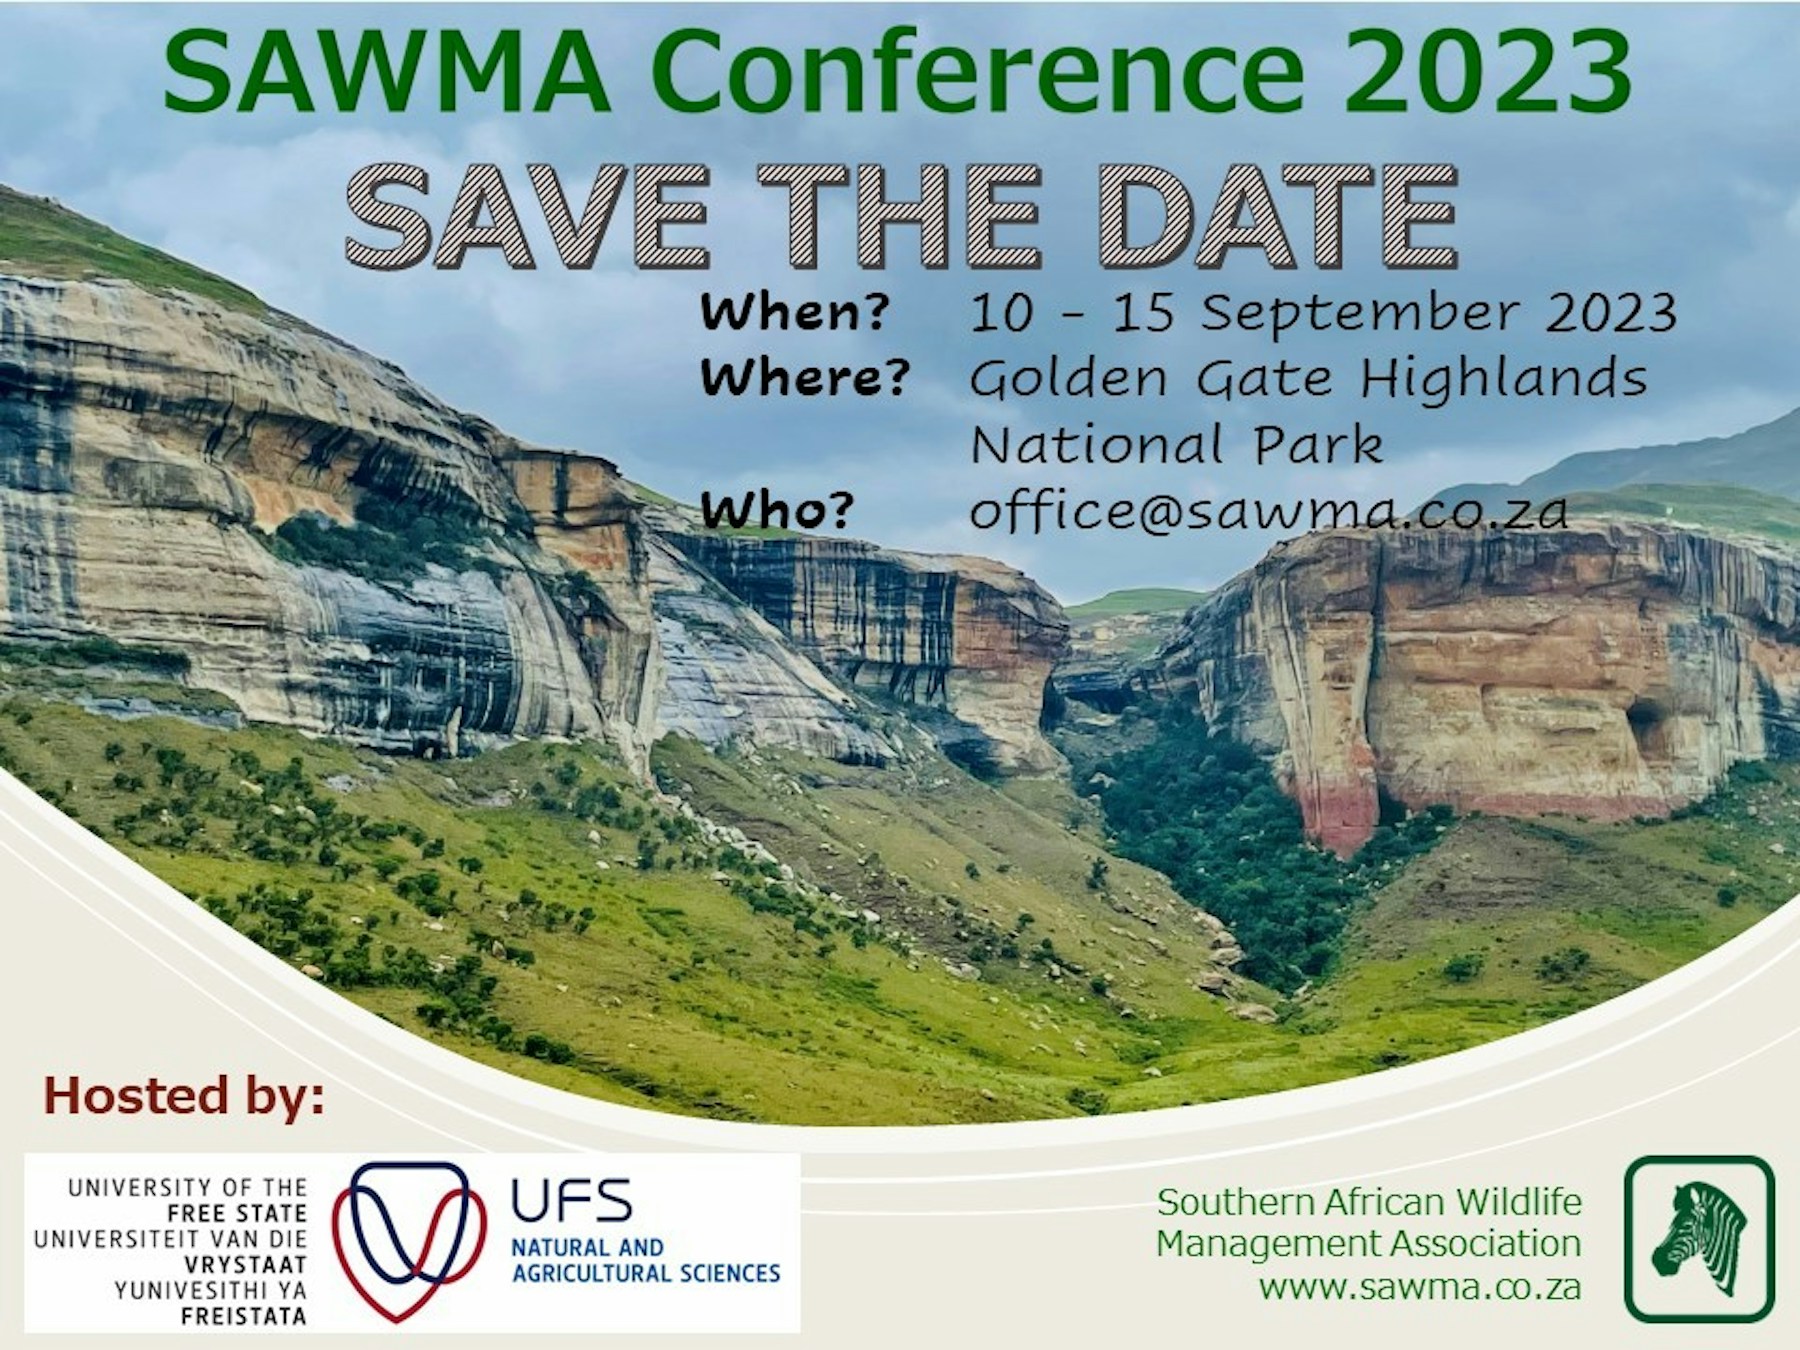 SAWMA 2023 SAVE THE DATE